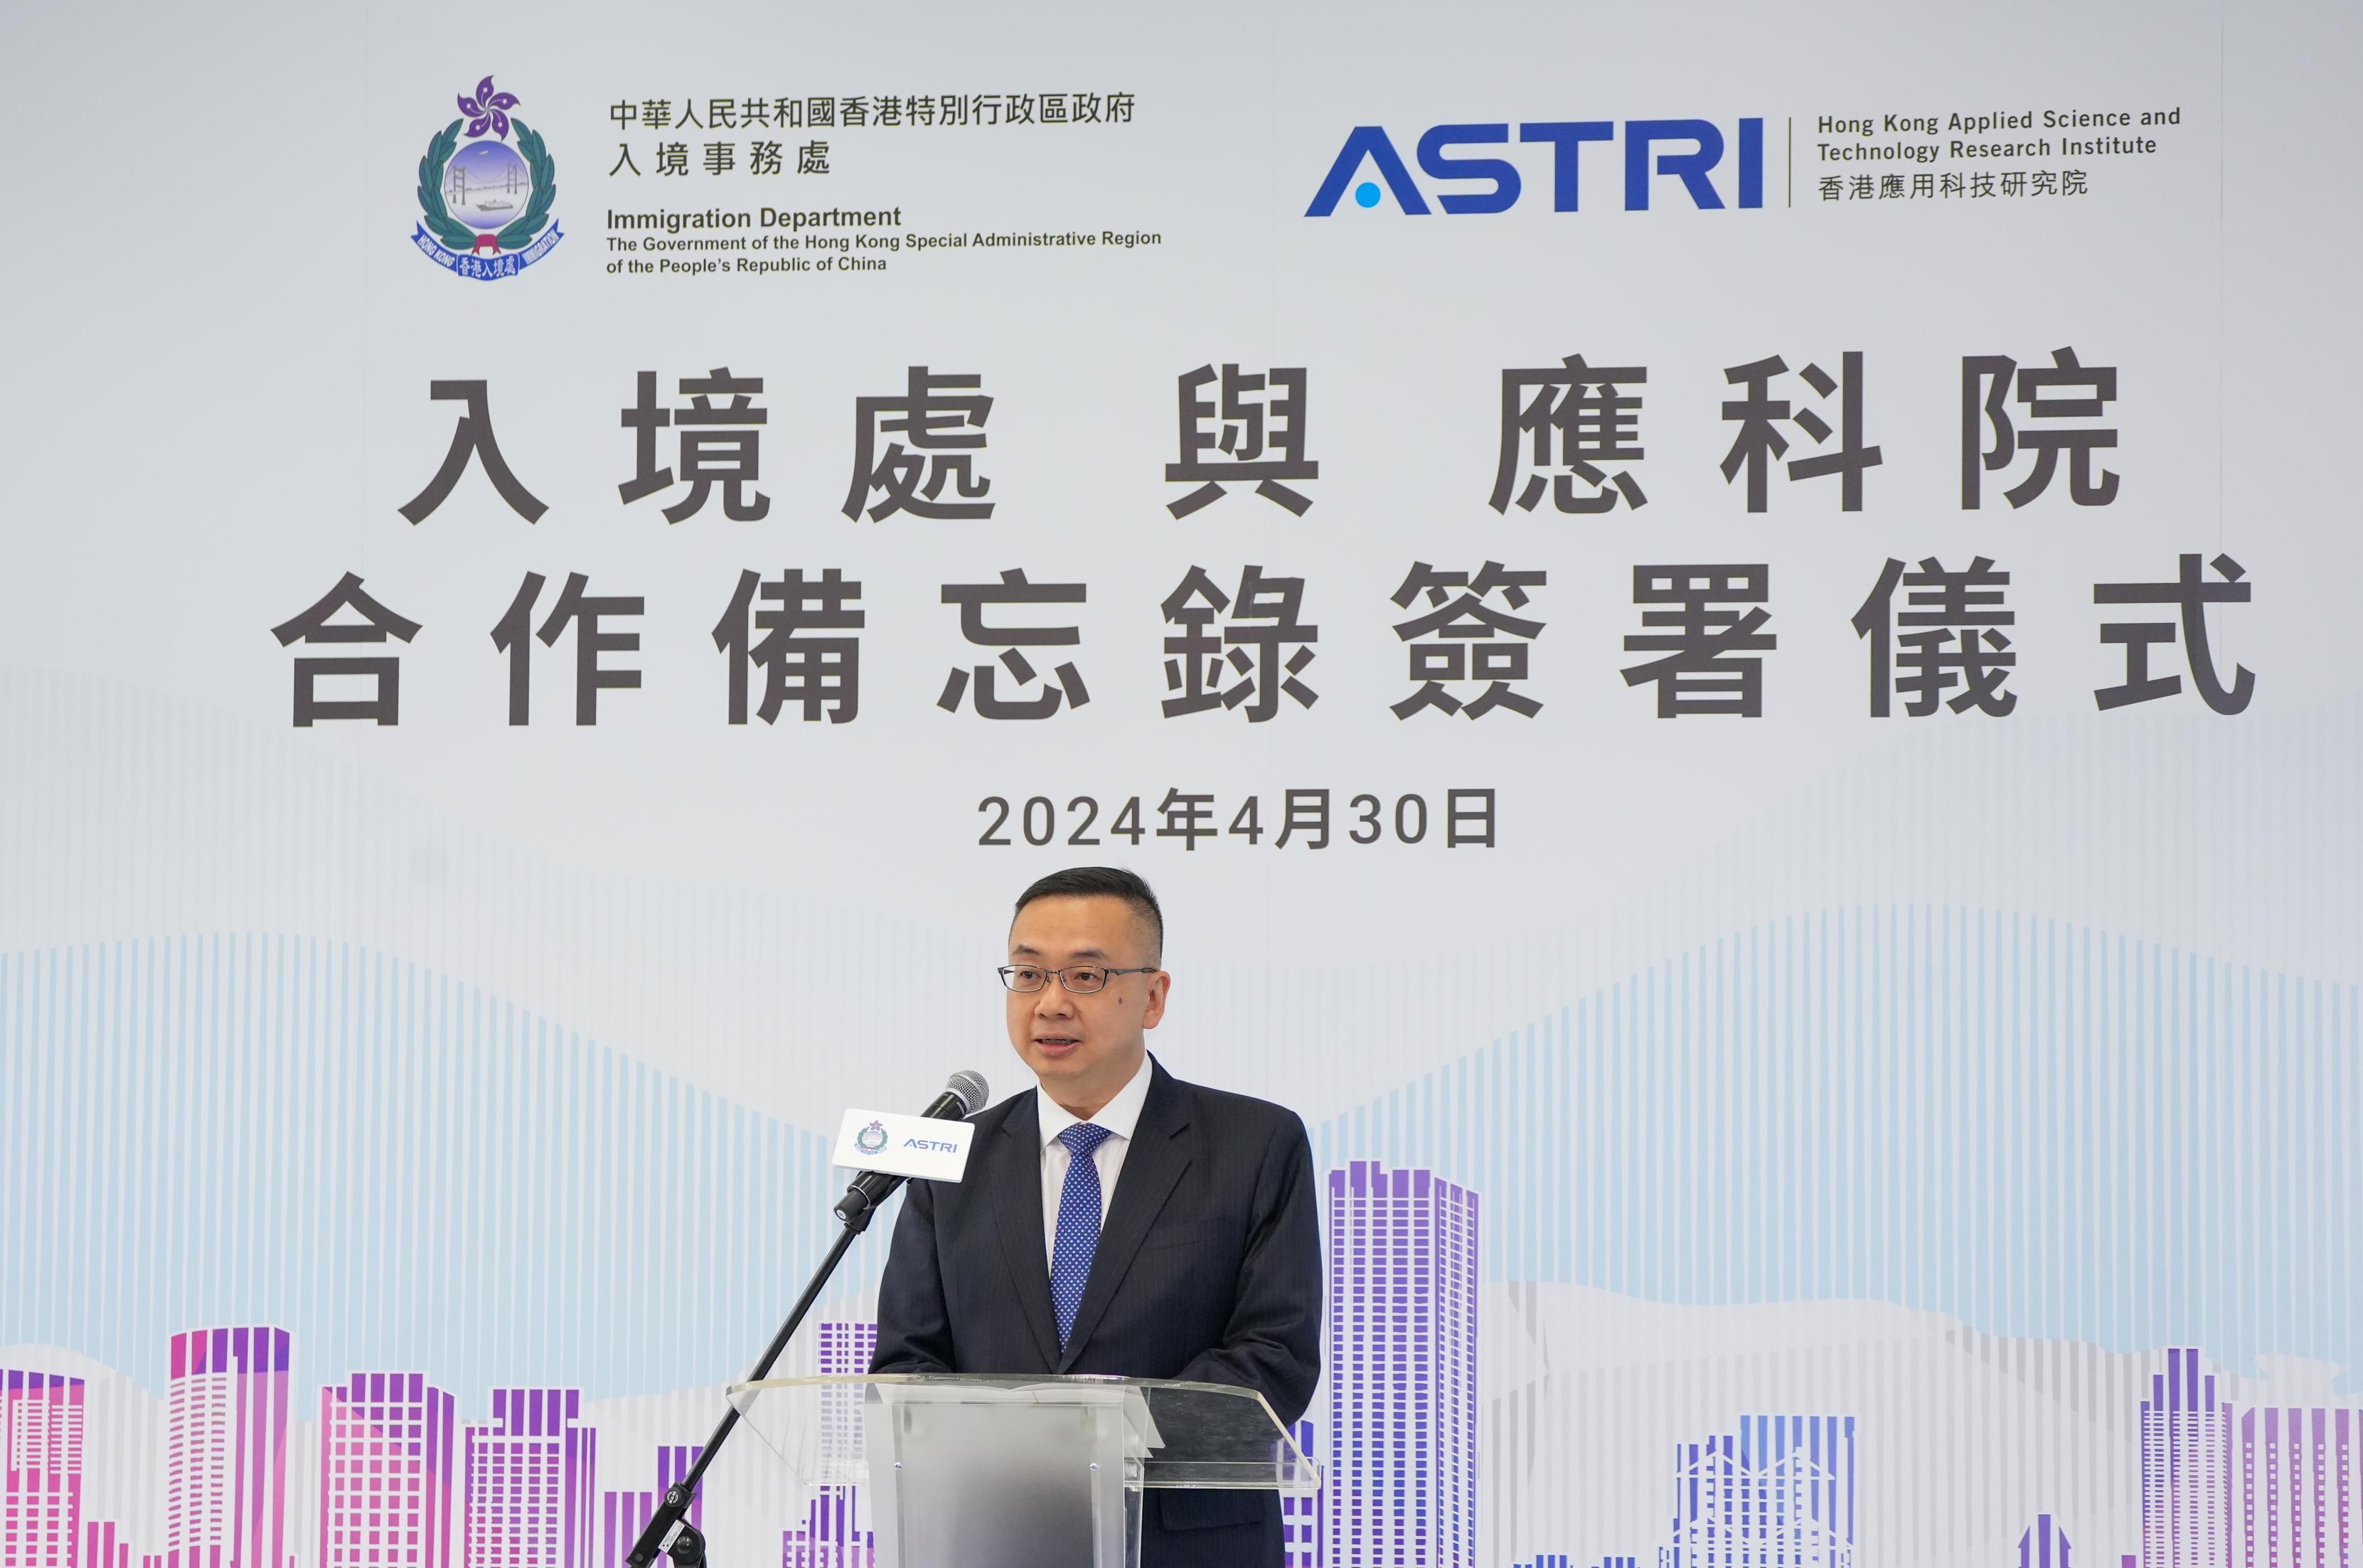 The Immigration Department and the Hong Kong Applied Science and Technology Research Institute signed a Memorandum of Understanding today (April 30) to promote innovative technologies in public services. Photo shows the Director of Immigration, Mr Benson Kwok, delivering a speech at the signing ceremony.